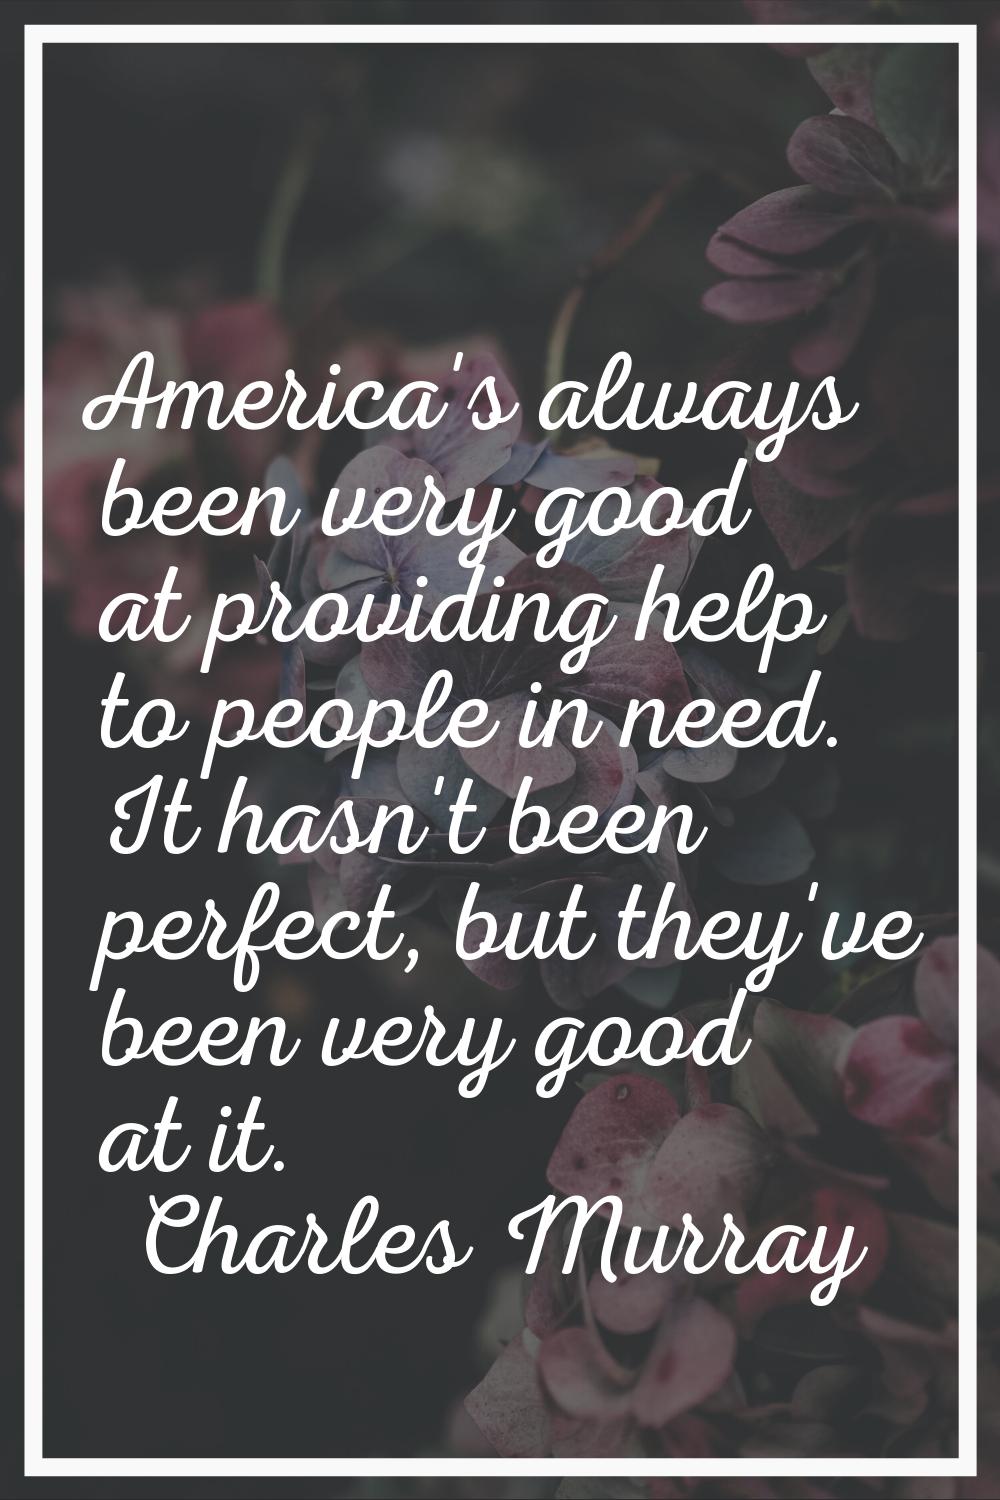 America's always been very good at providing help to people in need. It hasn't been perfect, but th